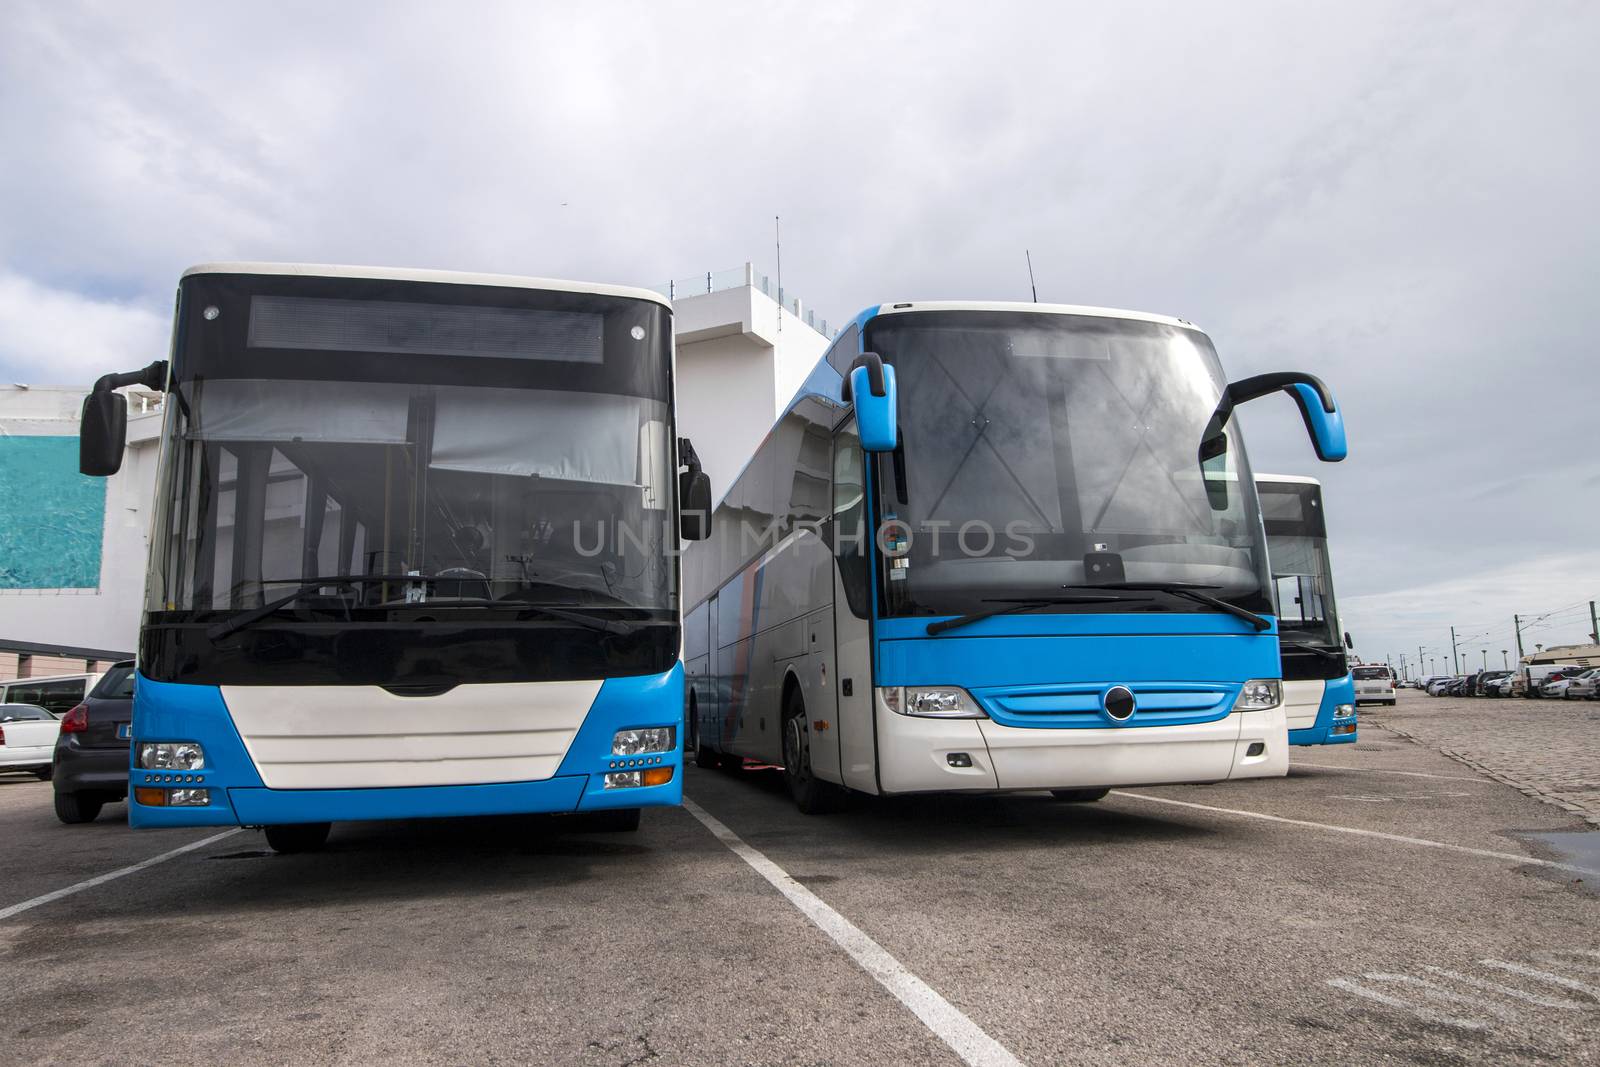 Buses parked in the city by membio